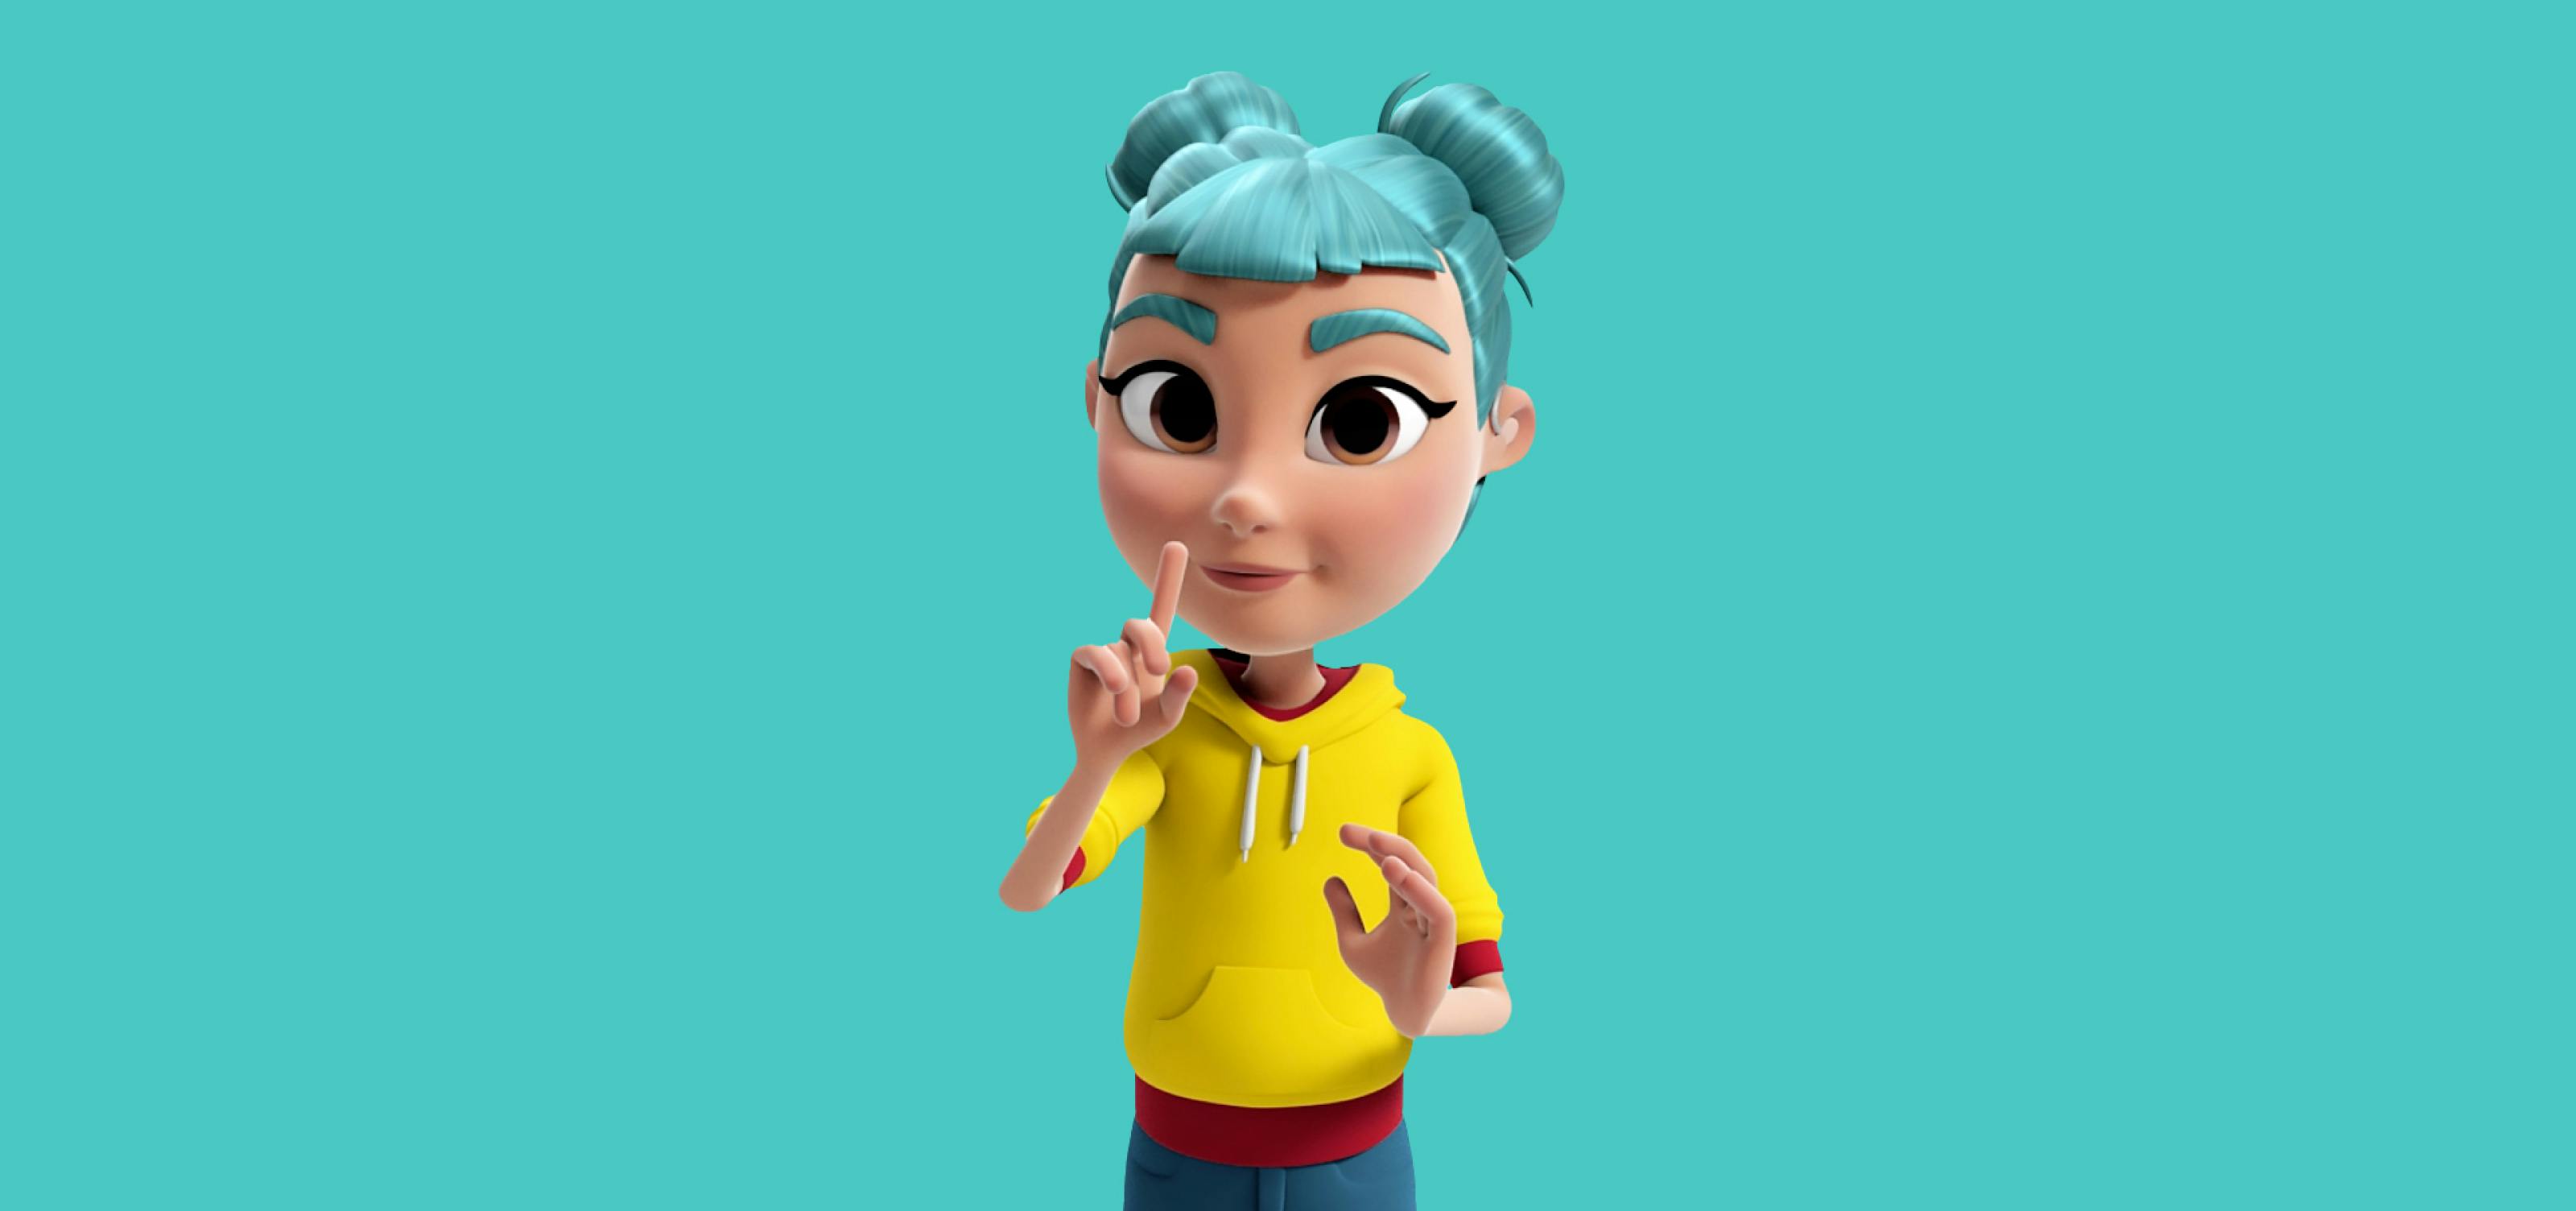 3D character from Storysign, on a blue background